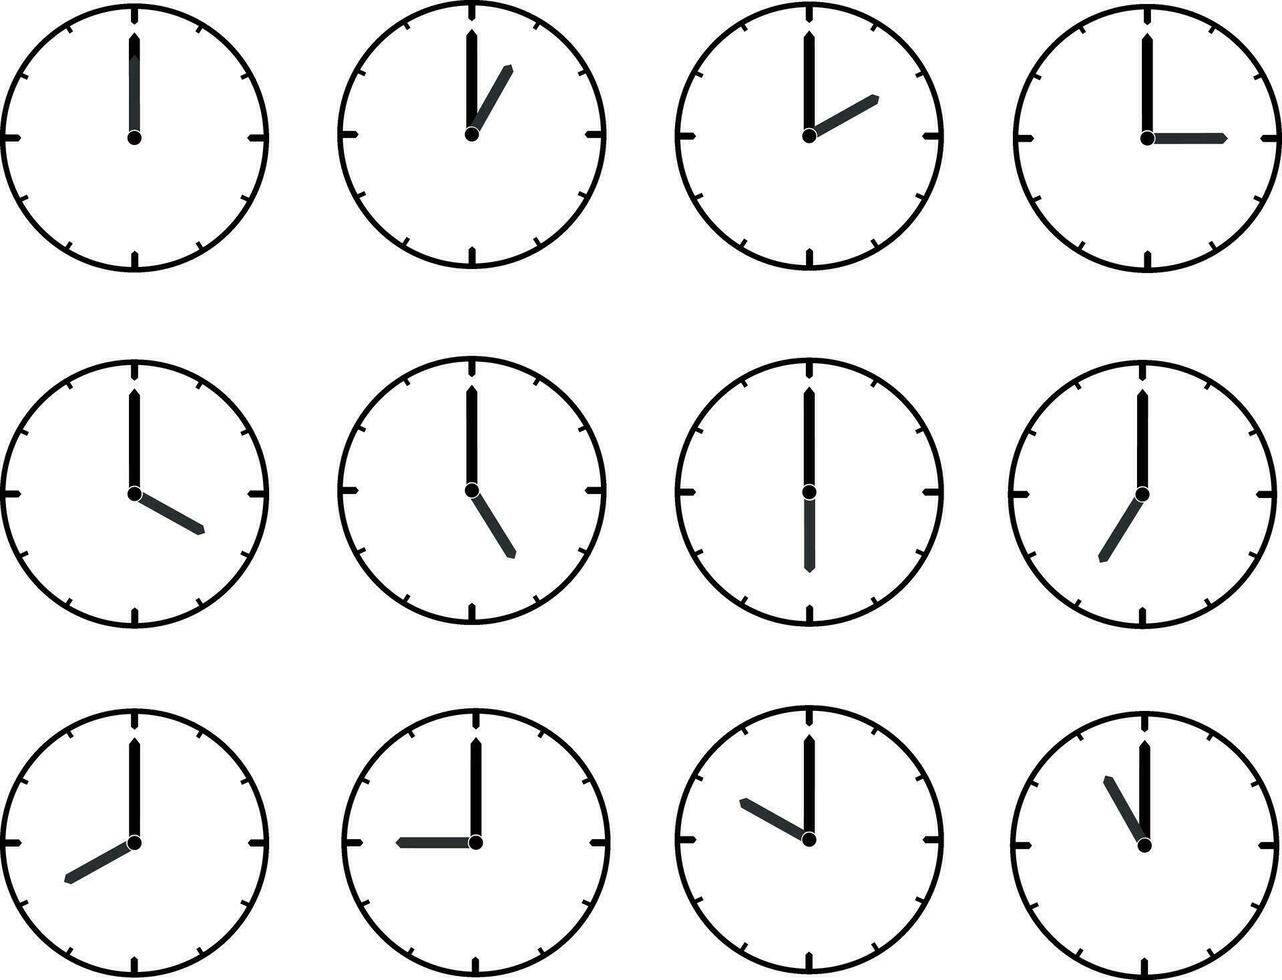 Clock icon set. Time clock icon collection. Line clock symbol isolated on white background. Collection of clock icons with varying times vector